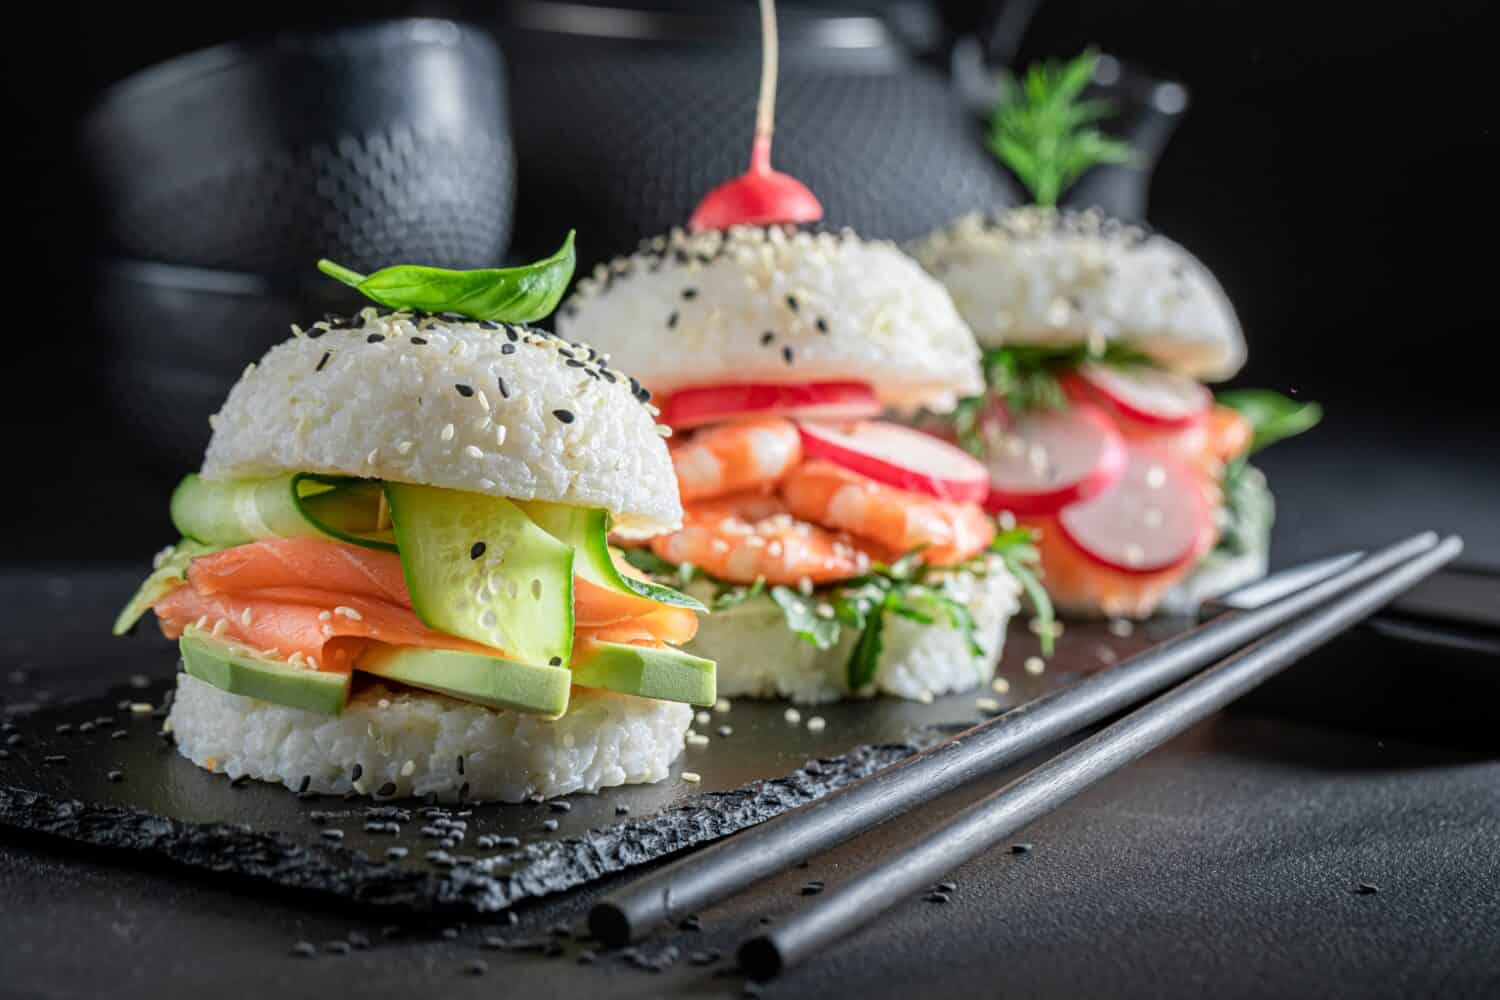 Unique and delicious sushi burger with seafood and rice on strone plate. Japanese dessert made of seafood and rice.